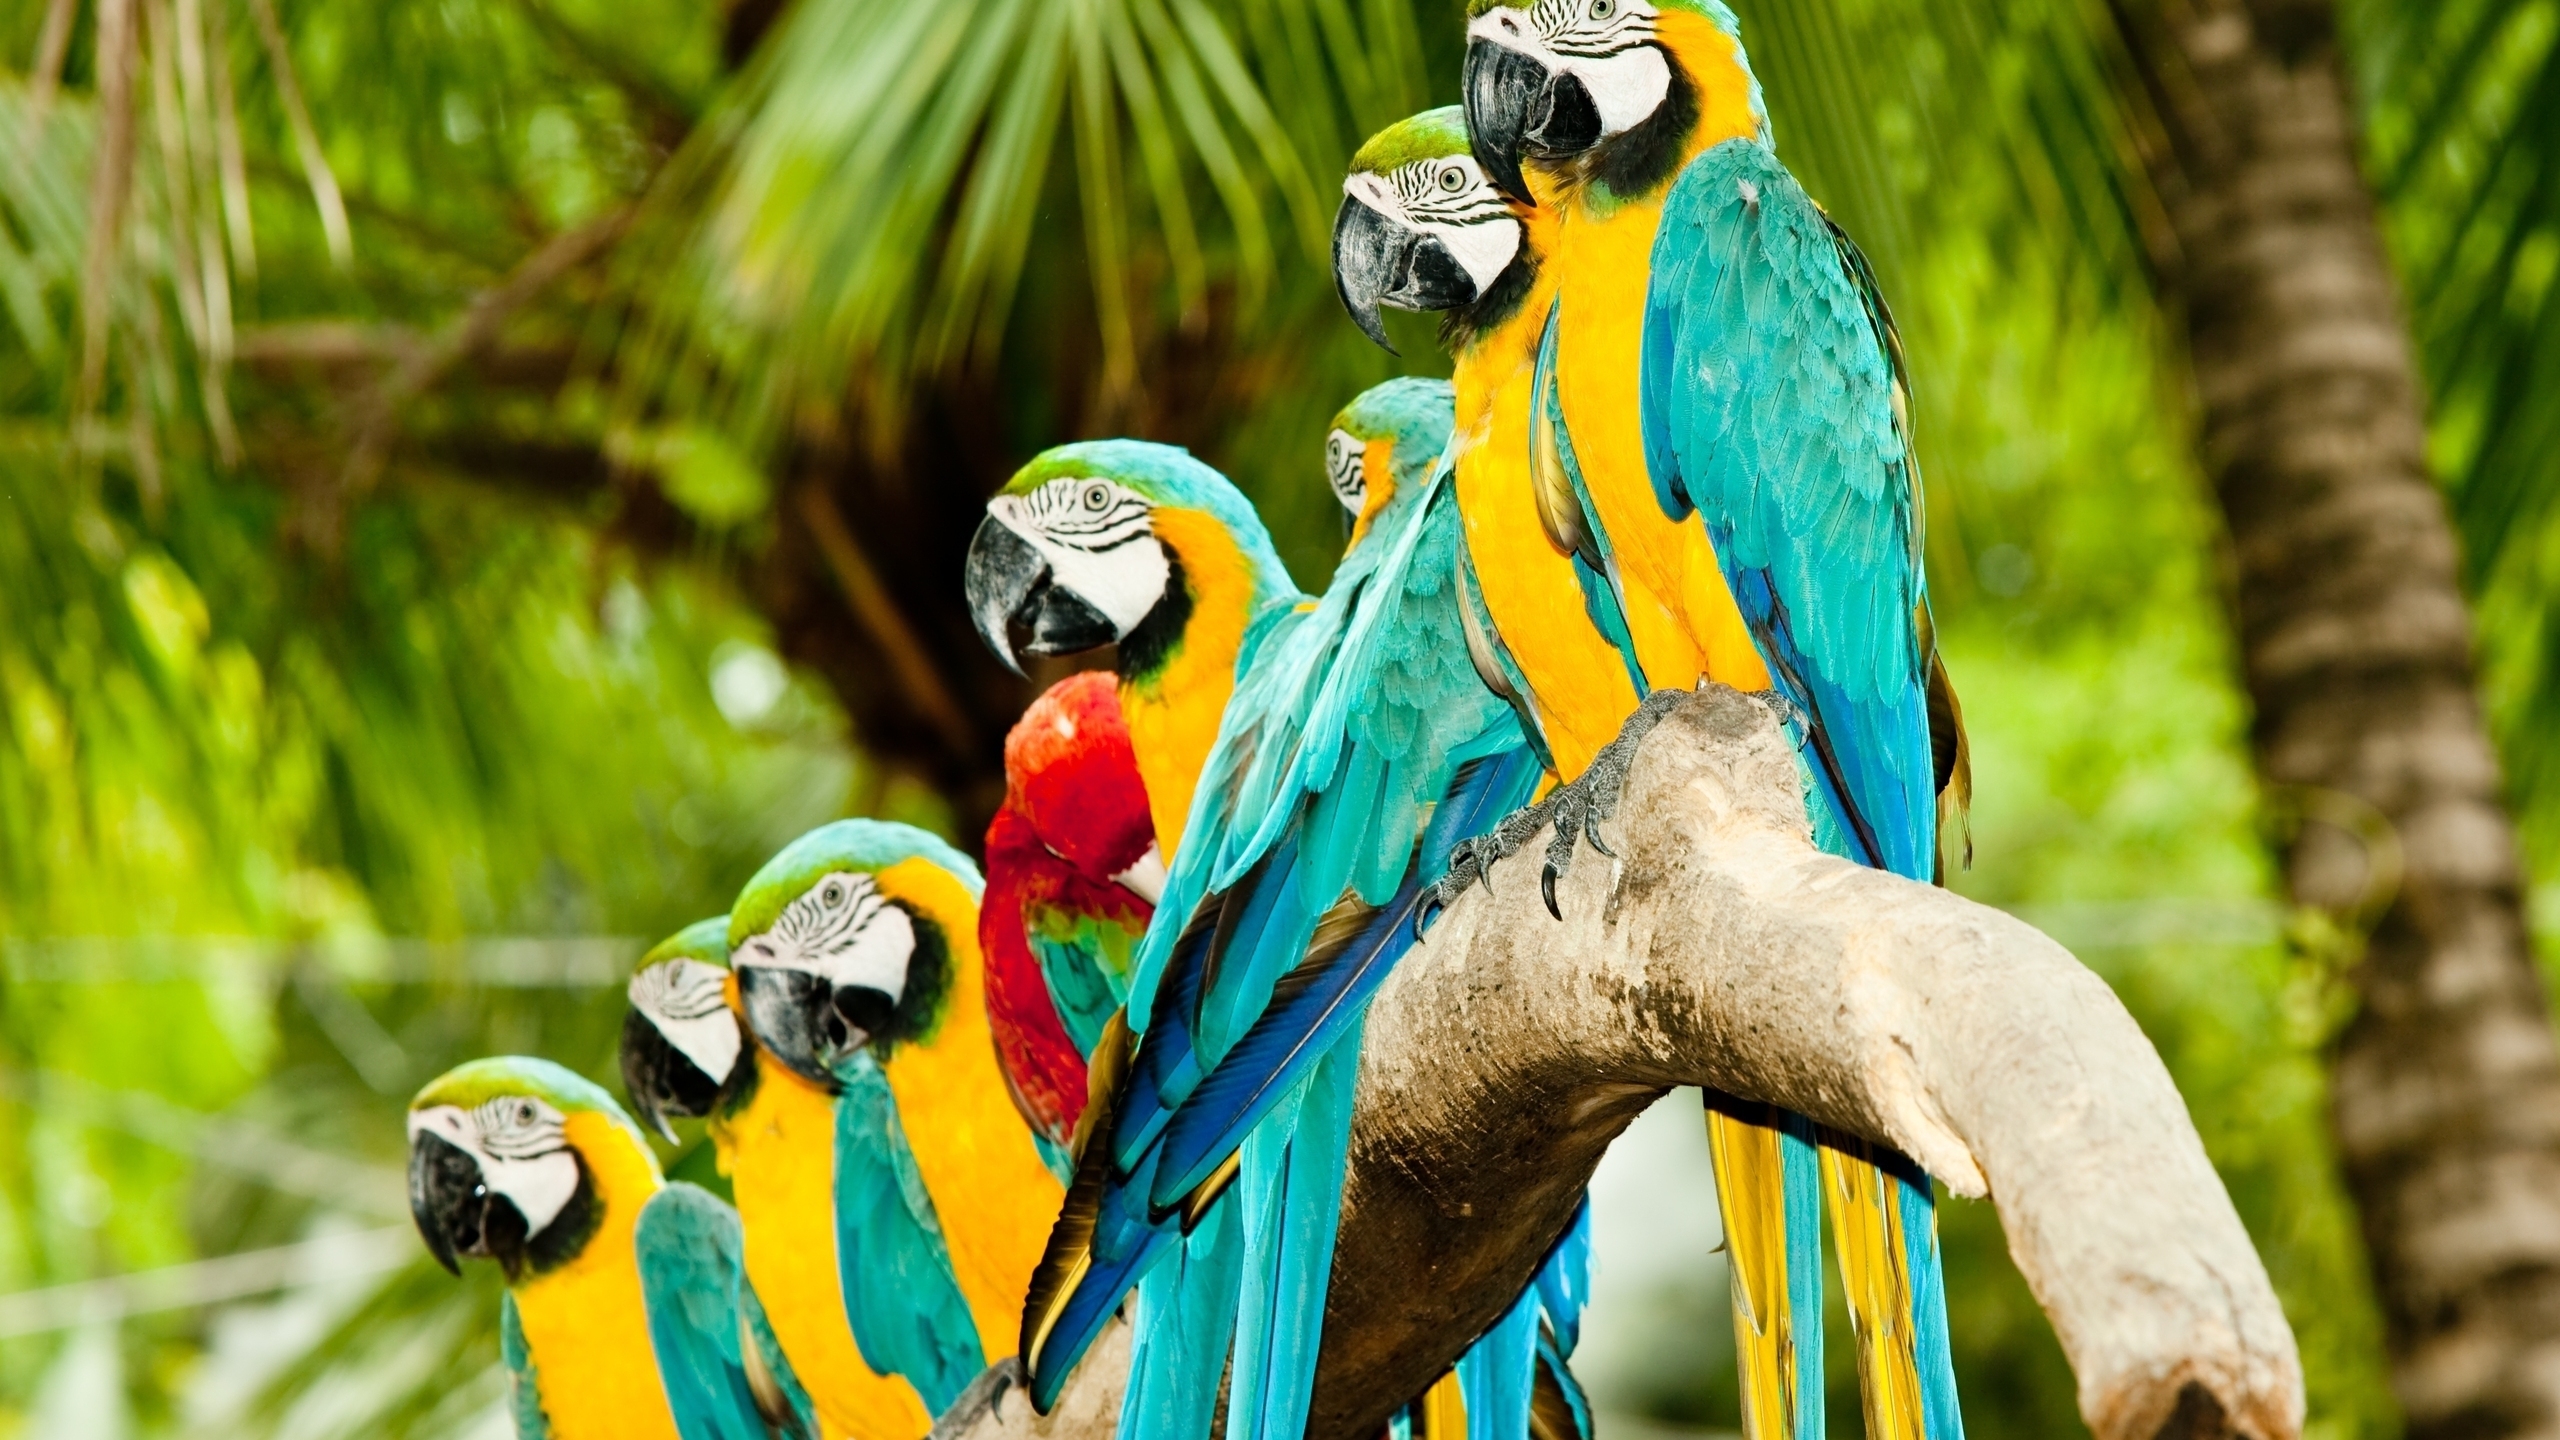 Colourful Parrots for 2560x1440 HDTV resolution